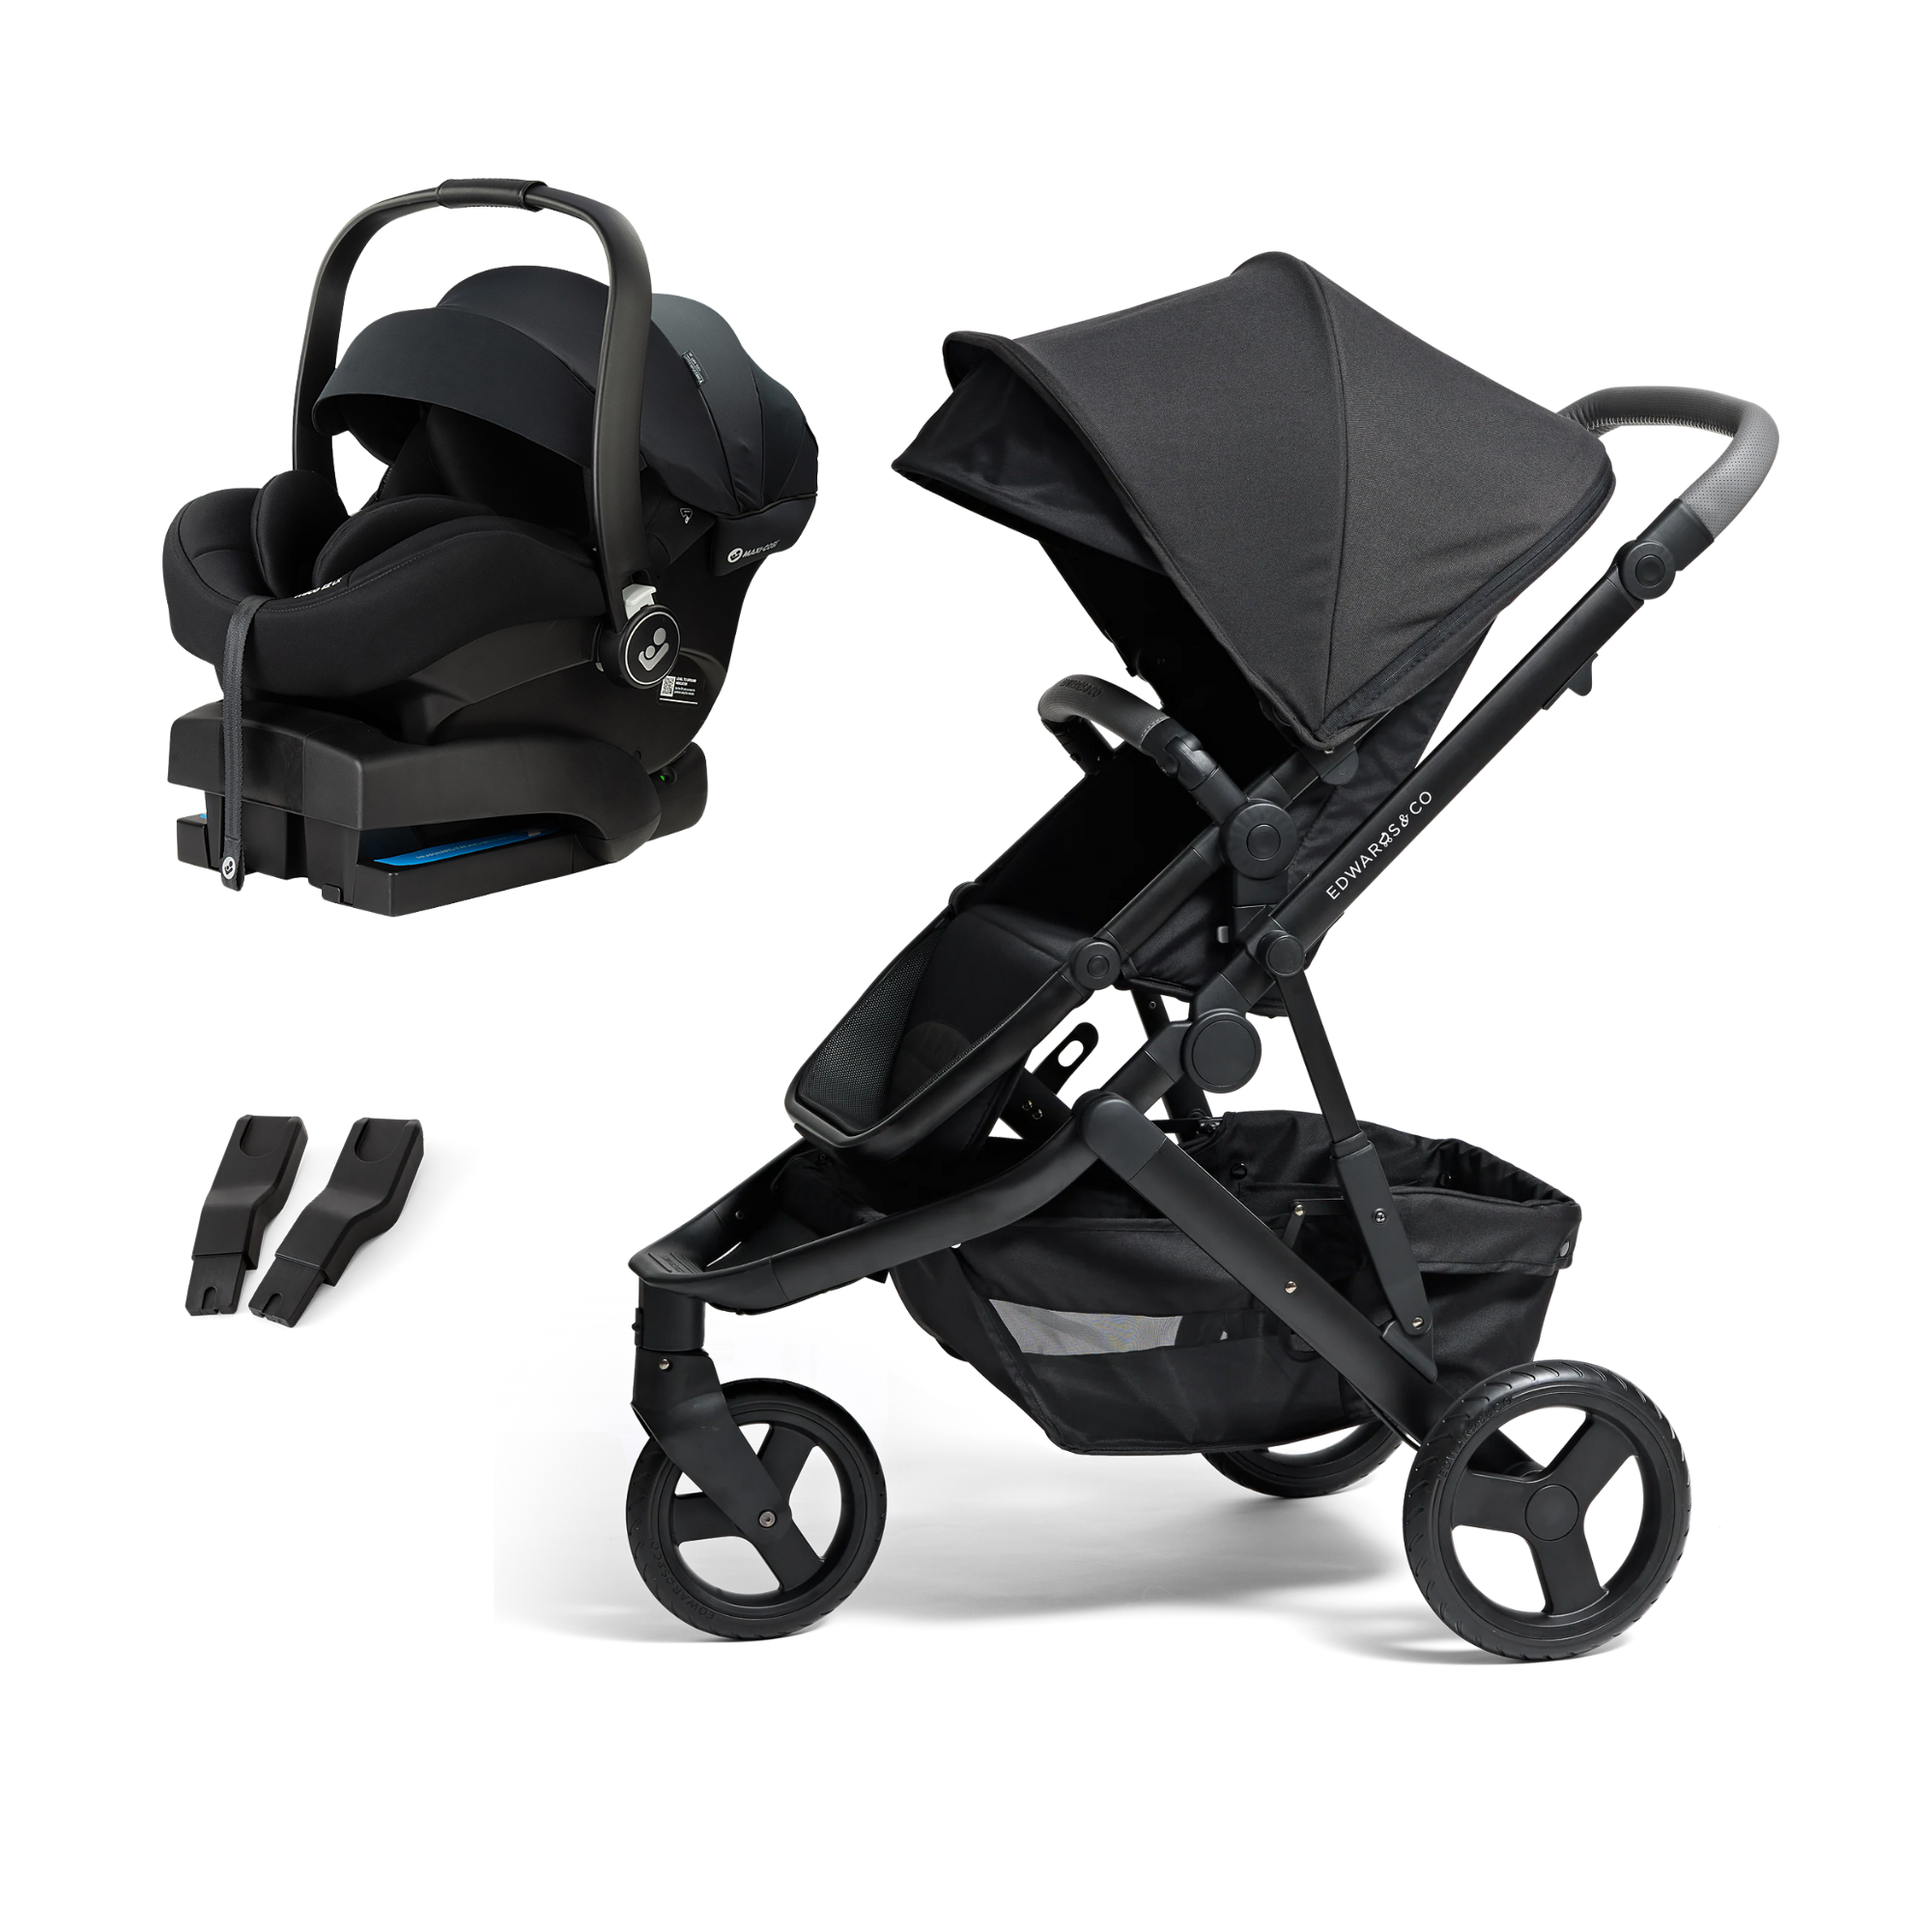 Edwards & Co Oscar M2 Travel System | Maxi Cosi Mico 12 LX Capsule (sale ends 21/6) - Tiny Tots Baby Store 